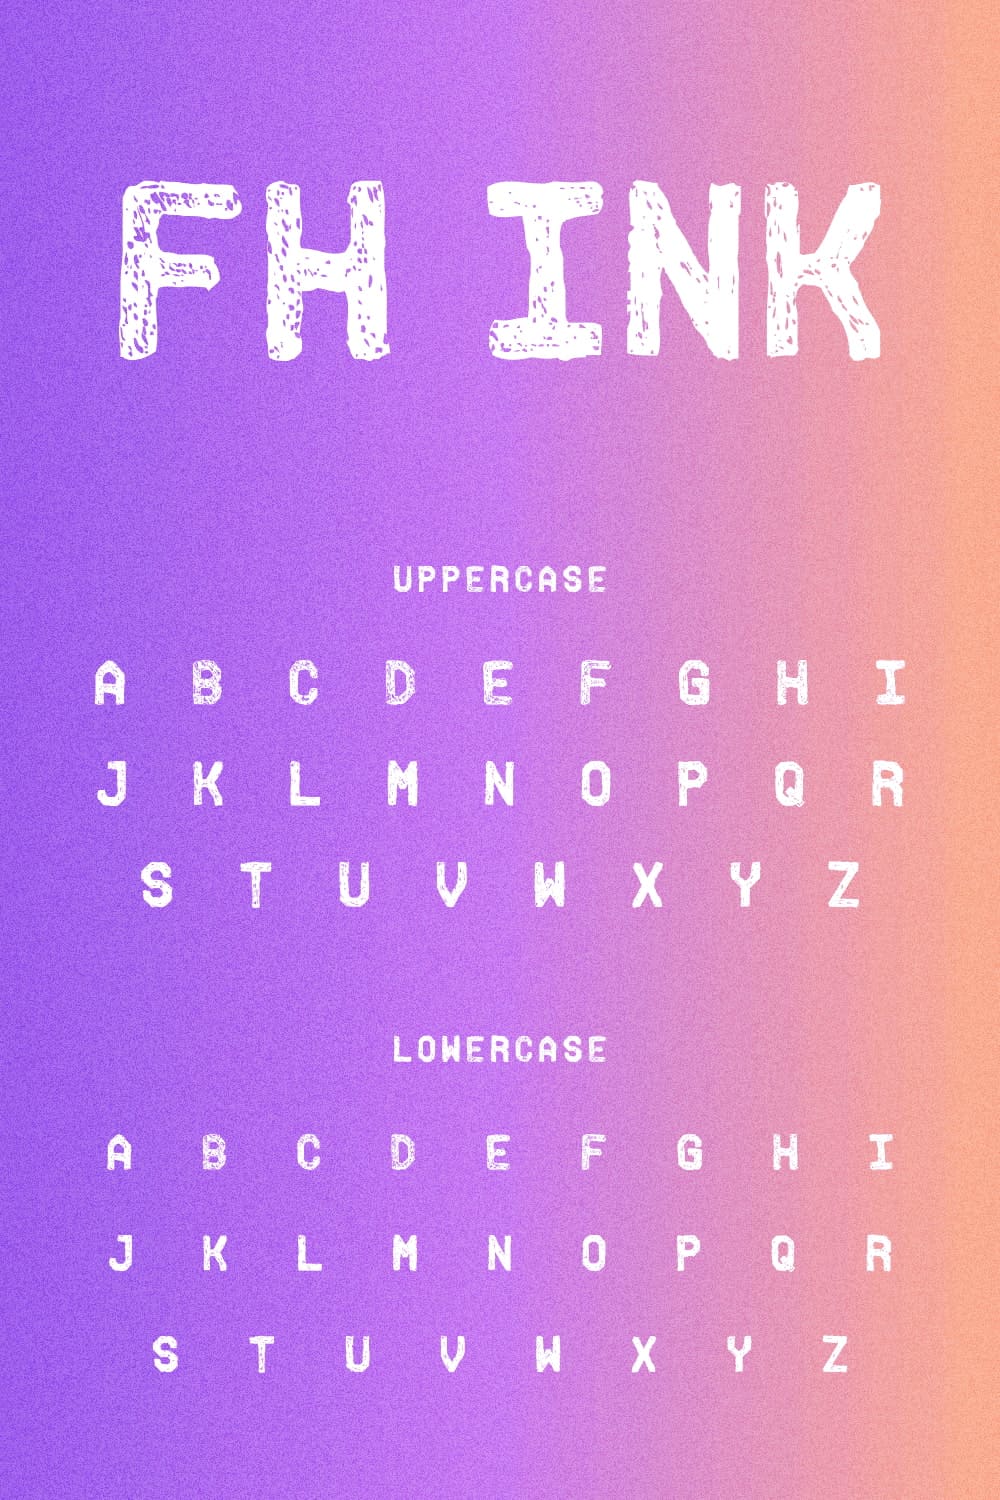 Fh Ink Free Font Pinterest MasterBundles Collage Image with lowercase and uppercase.